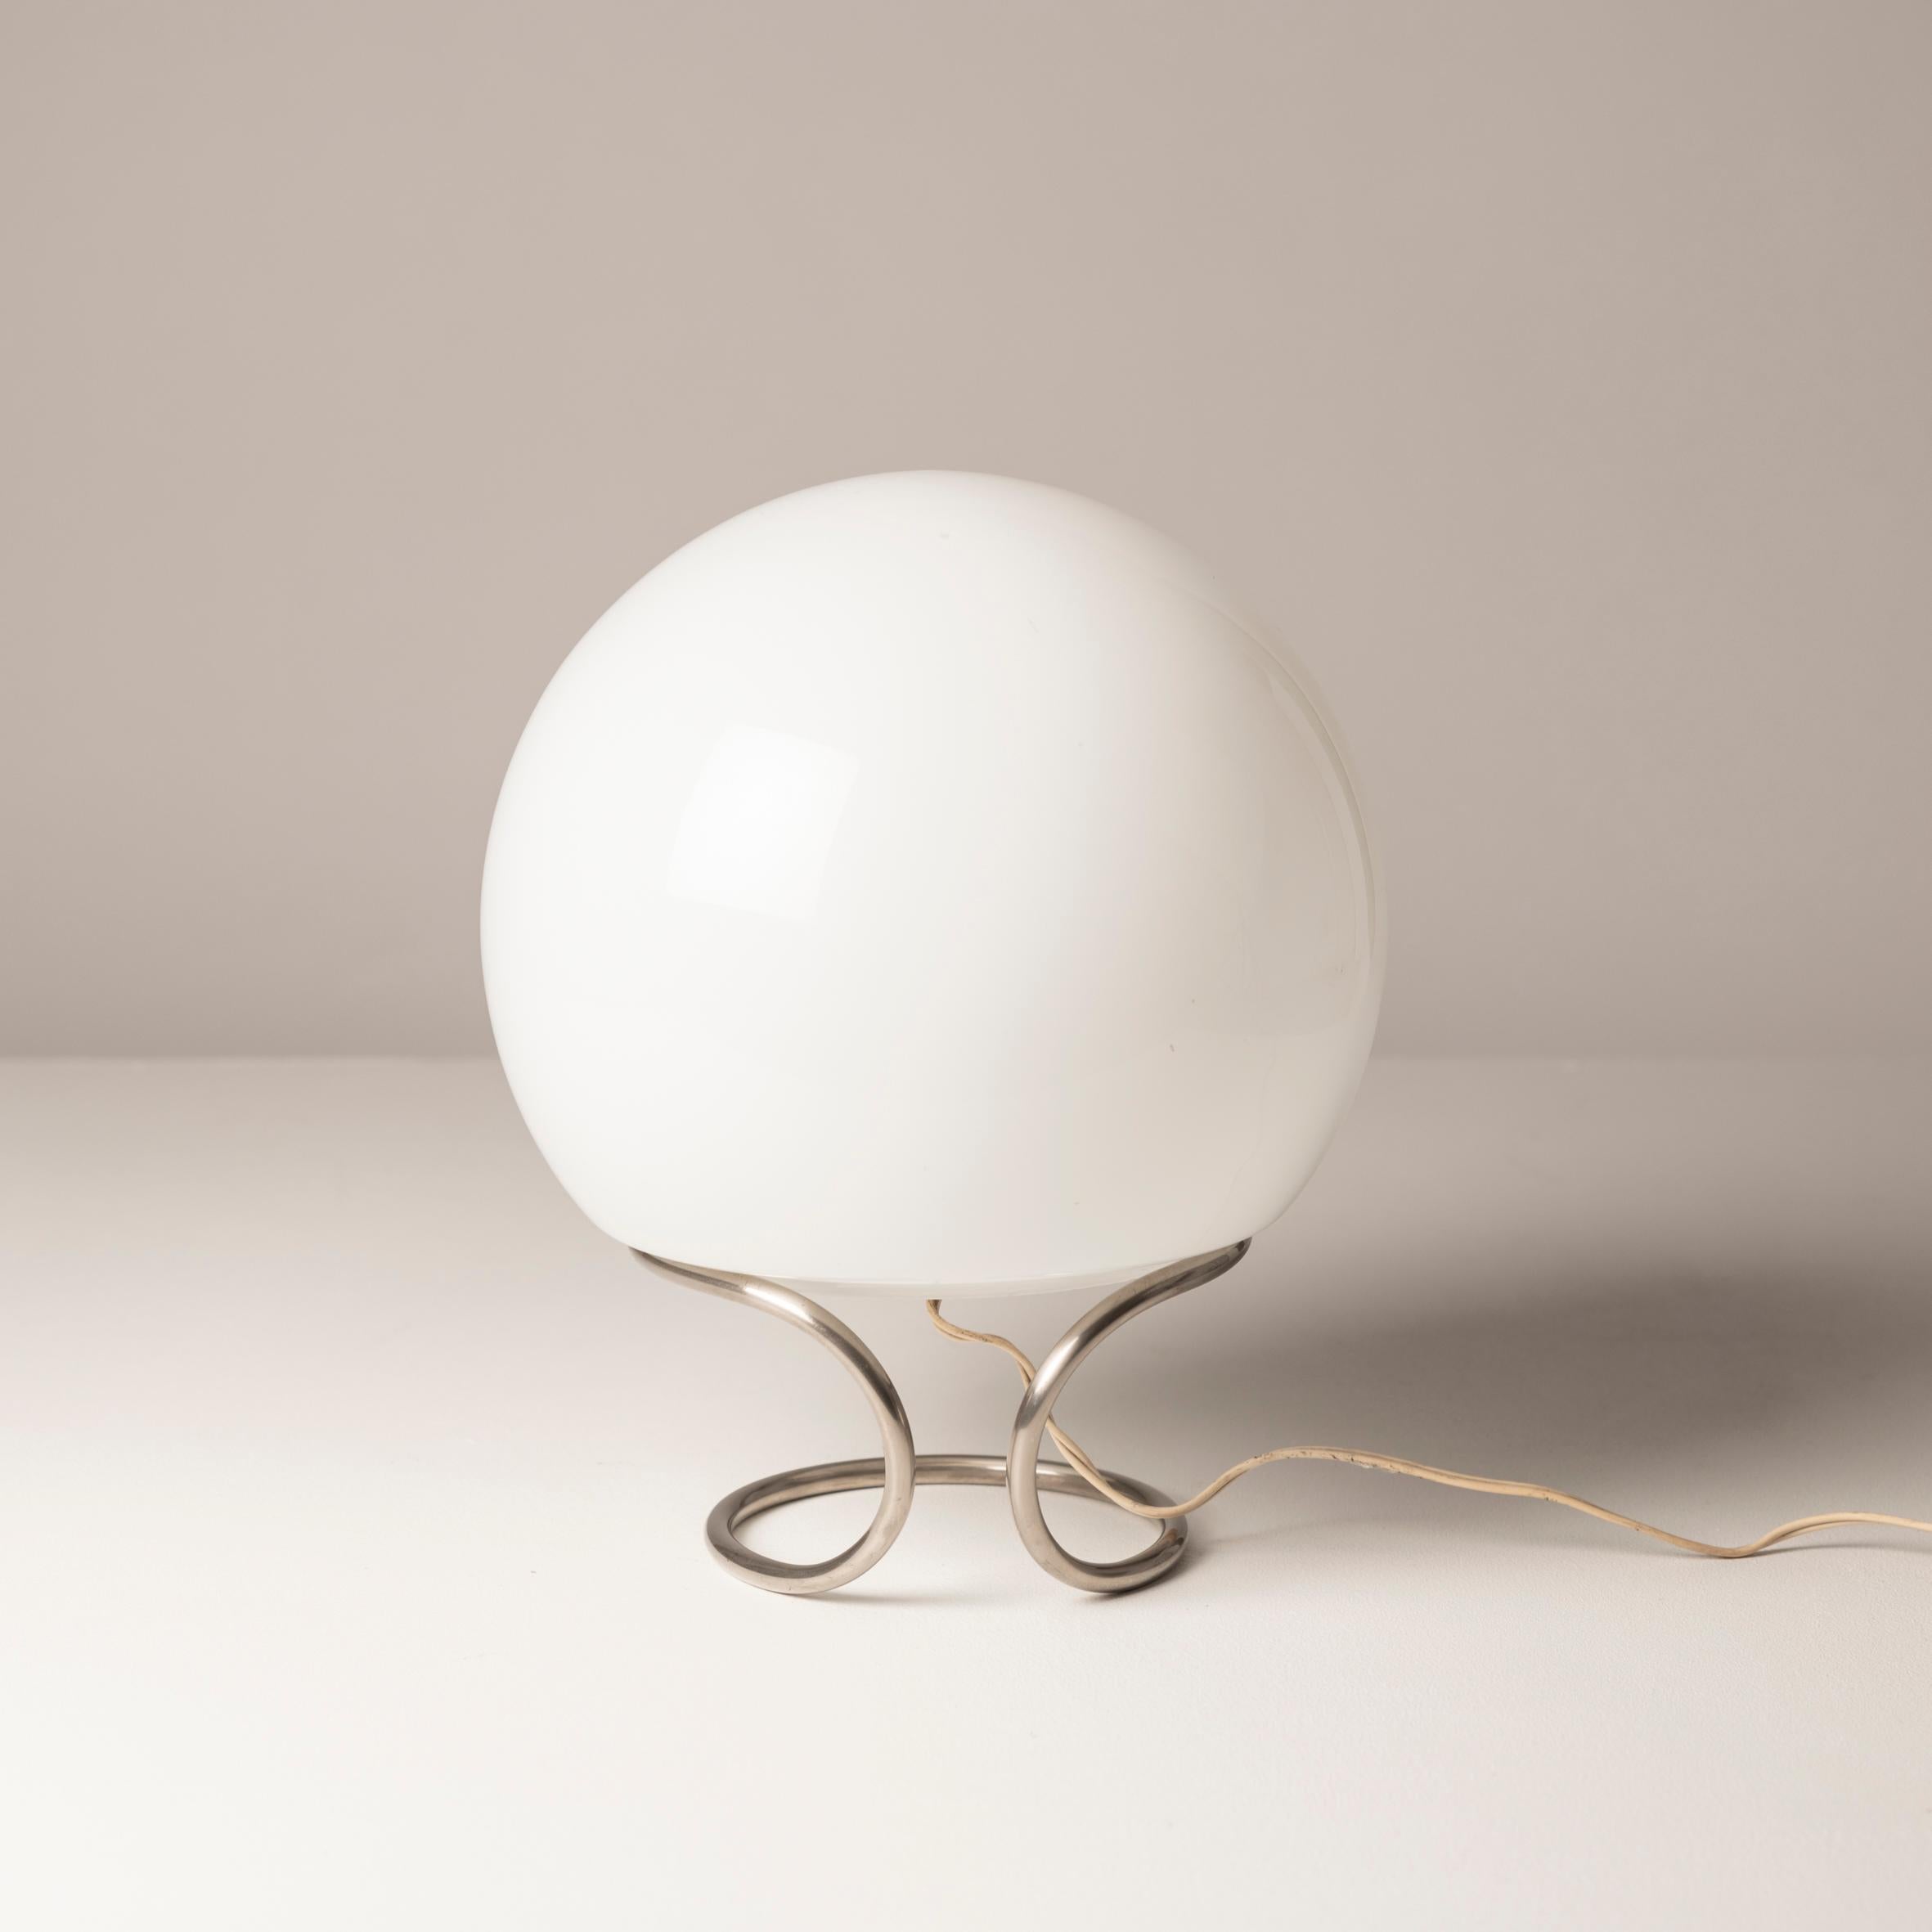 Investing in this Italian spheric opaline Table Lamp from the 1960s presents a compelling opportunity to own a piece of mid-century modern design history that effortlessly blends elegance with functionality. The lamp's spheric opaline design exudes